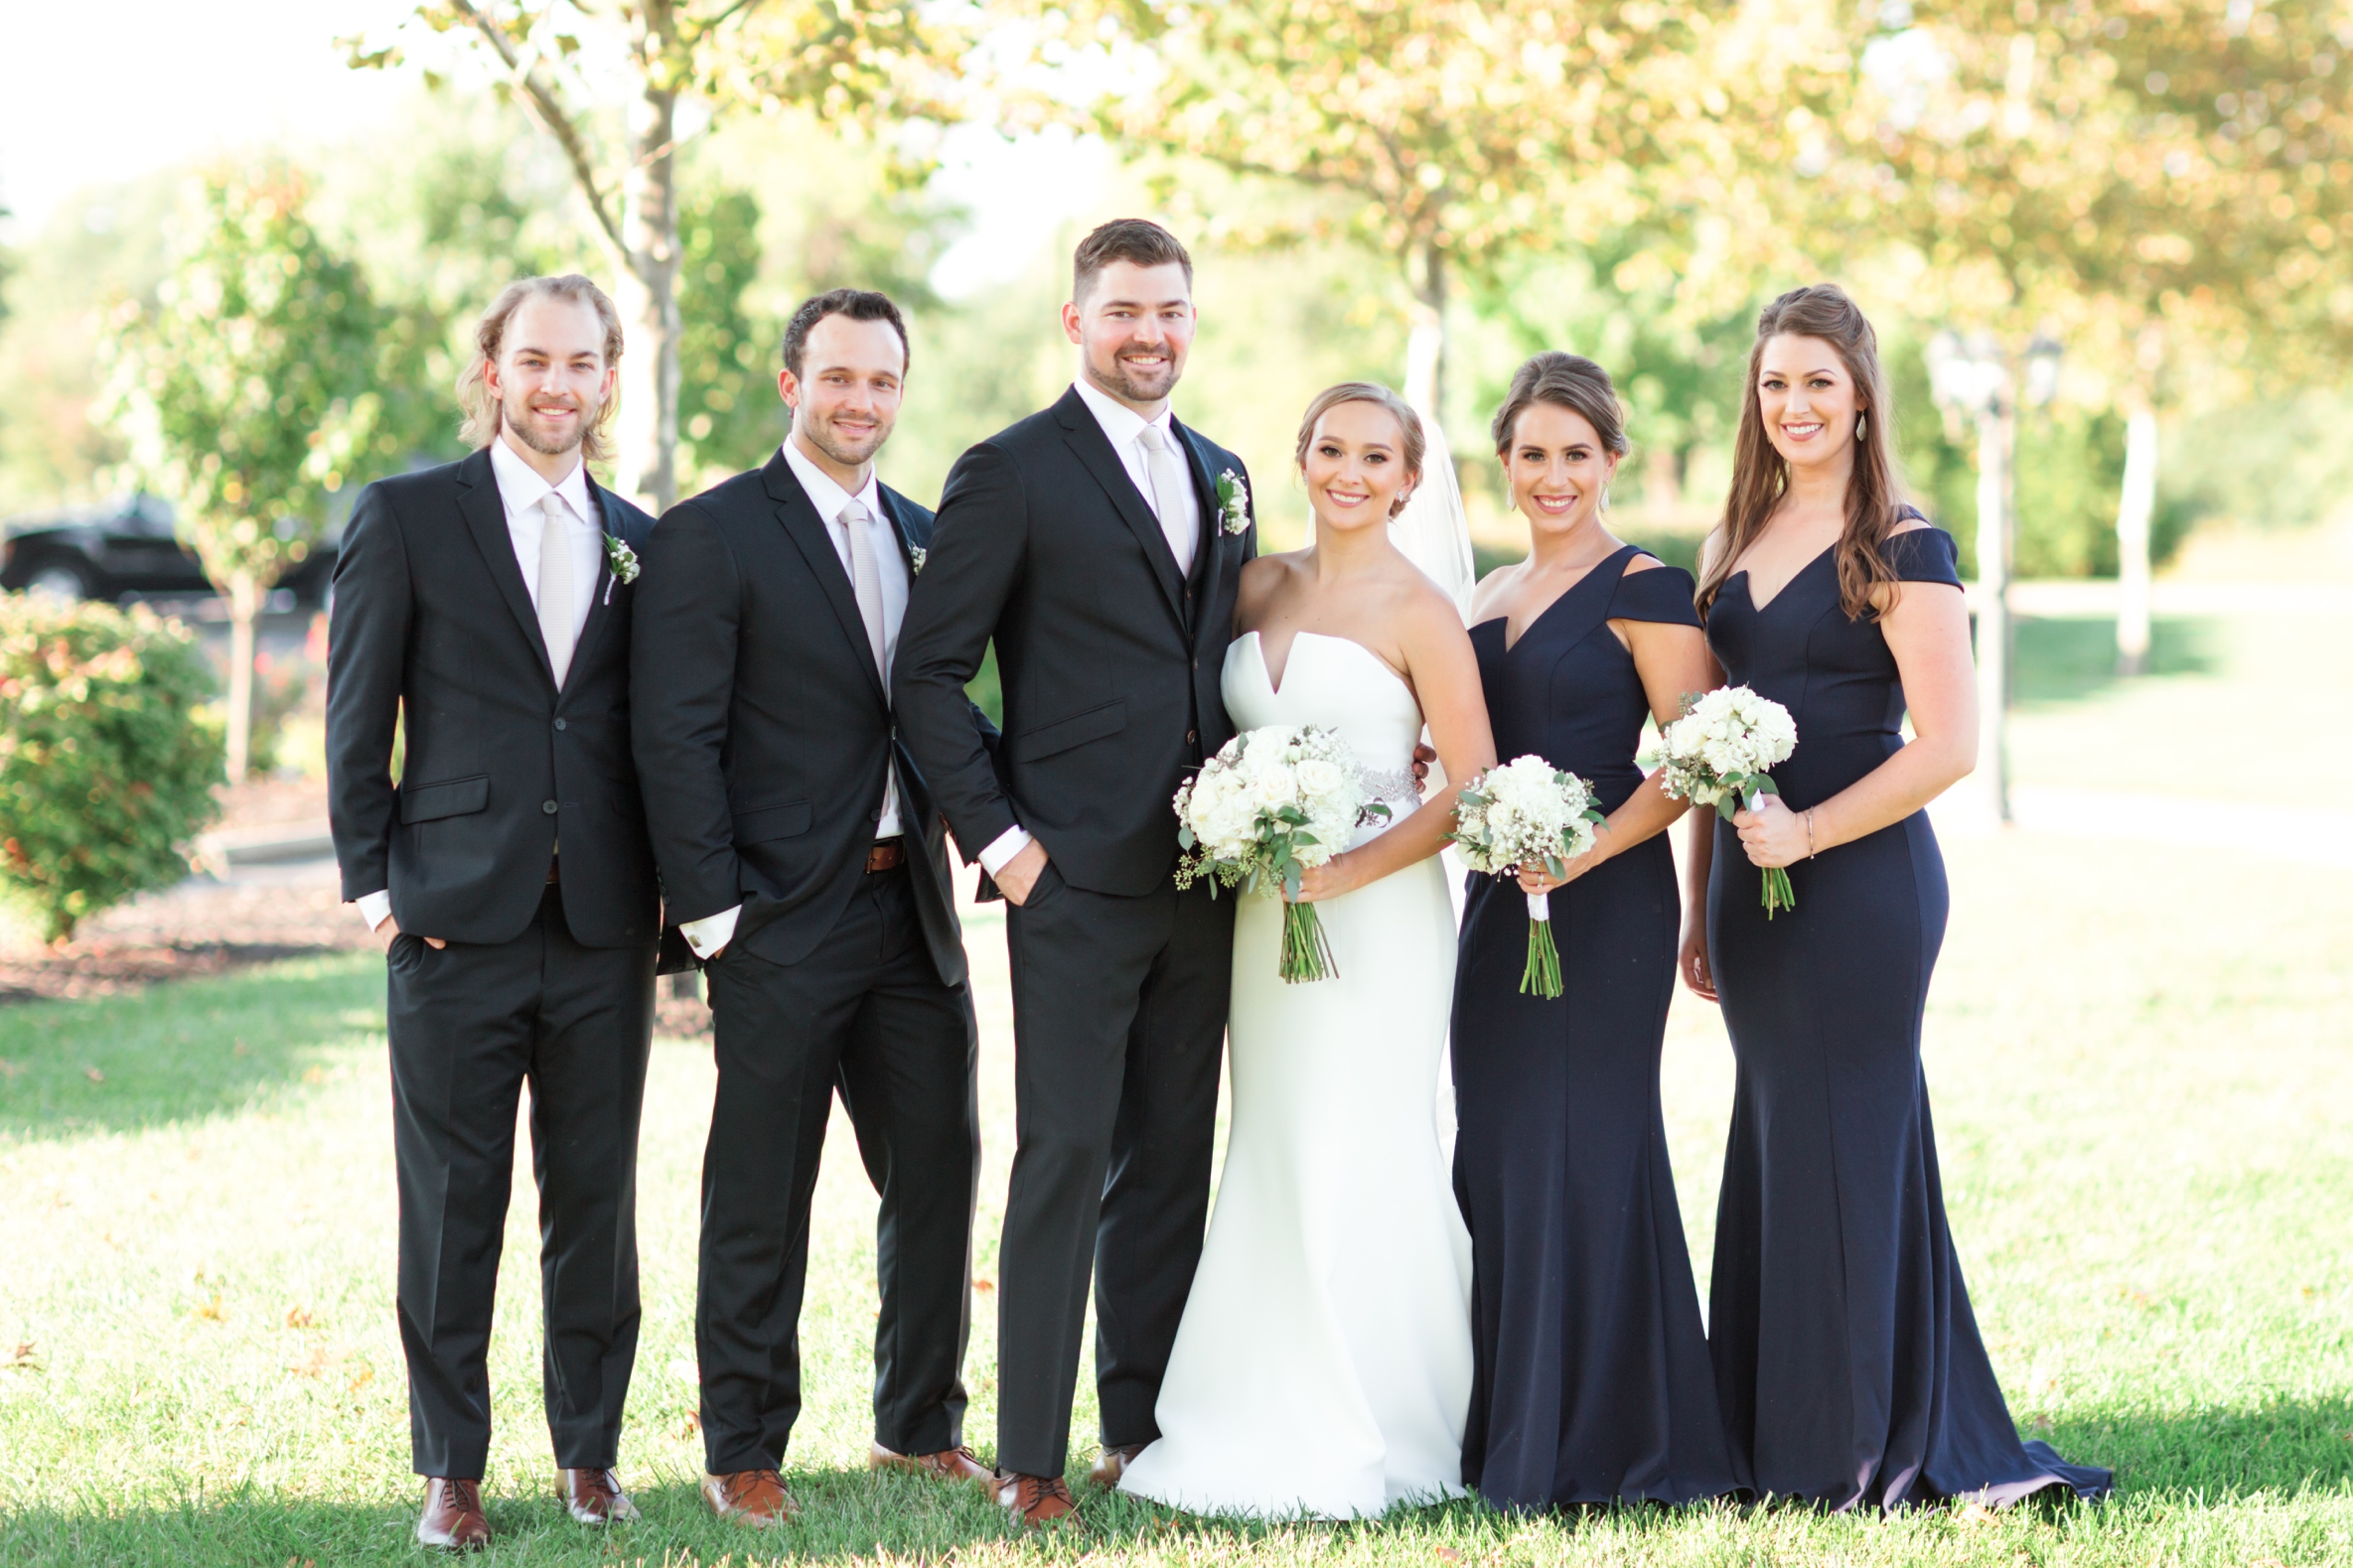 Bridal Party, Full Sun Pictures